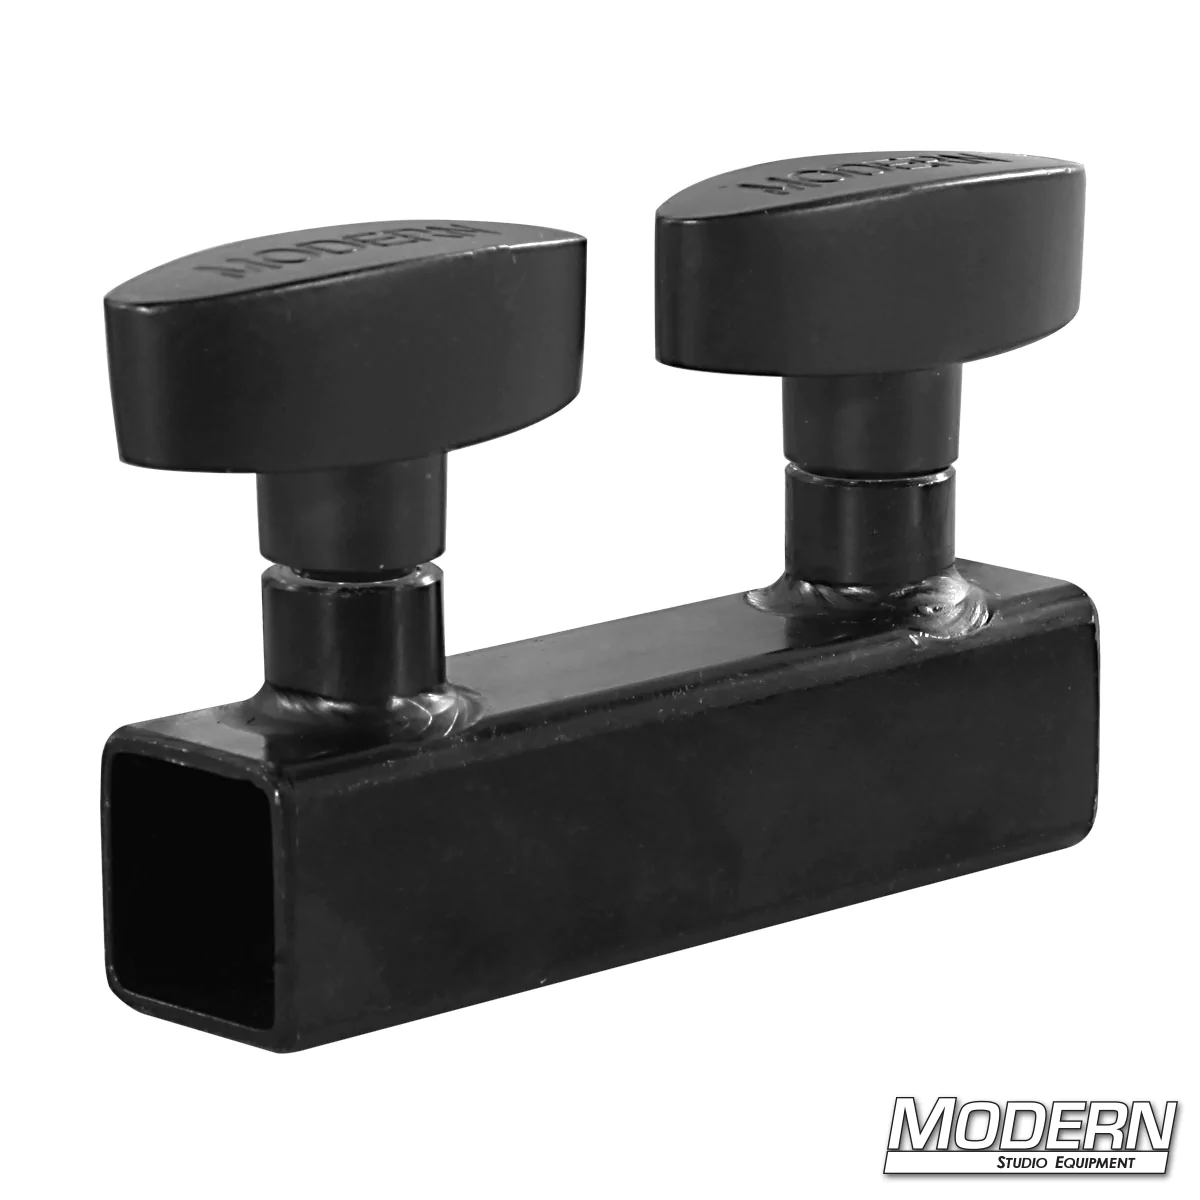 Sleeve for 3/4" Square Tube - Black Zinc with T-Handles